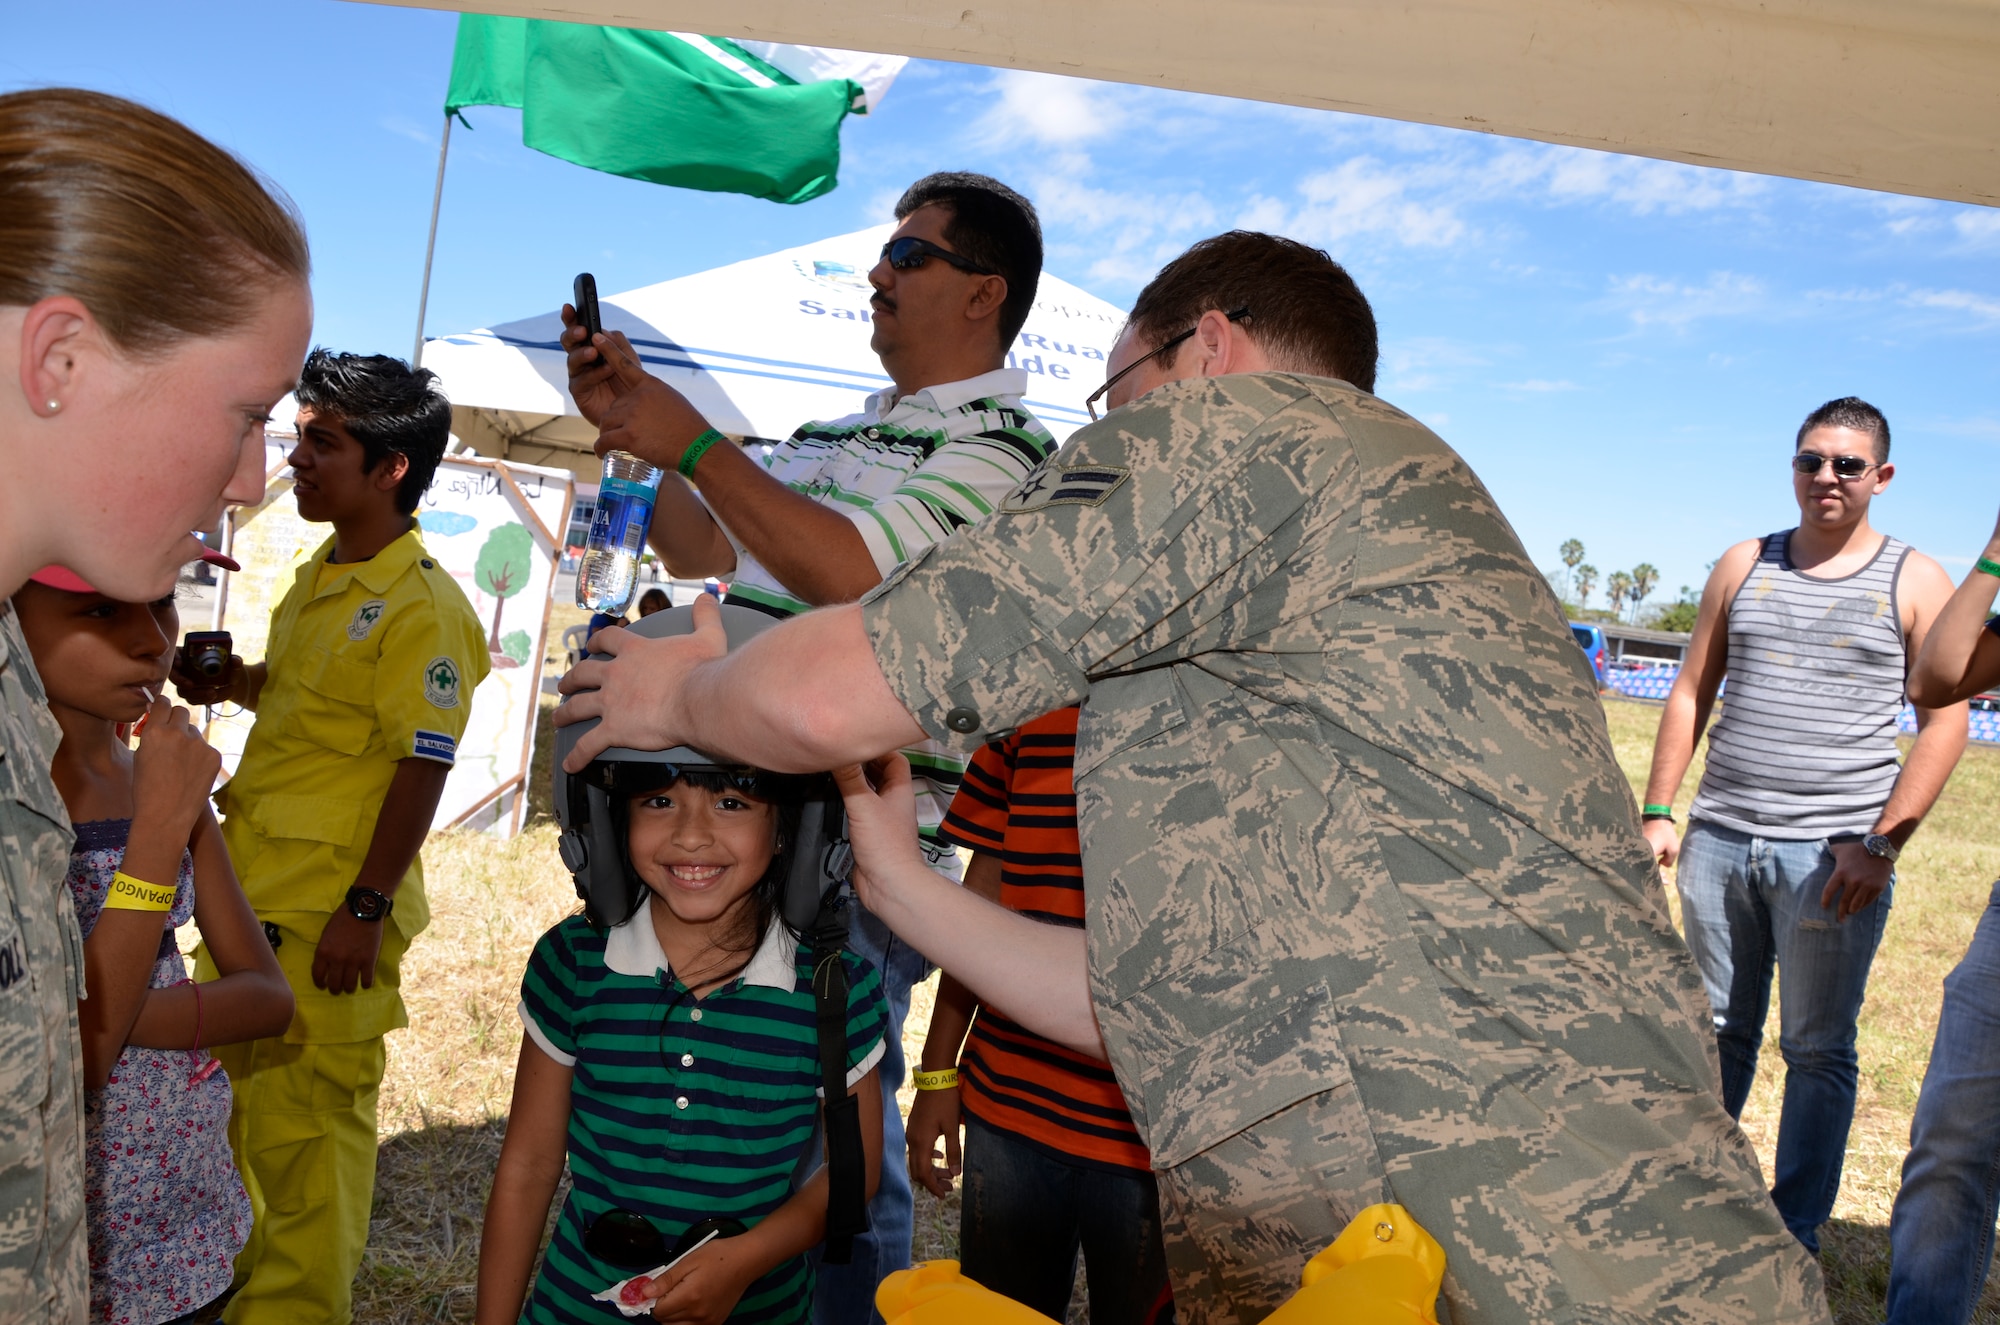 U.S. Air Force Airman 1st Class Alex Allbee assists a Salvadoran child wearing an aircrew flight helmet while Senior Airman Beverly Cole (left) translates information and instructions from English to Spanish at the 2013 Ilopango Air Show in Ilopango, El Salvador as part of a community relations event for the State Partnership Program January 26, 2013.  (N.H. National Guard photo by 1st Lt. Aaron McCarthy/RELEASED)